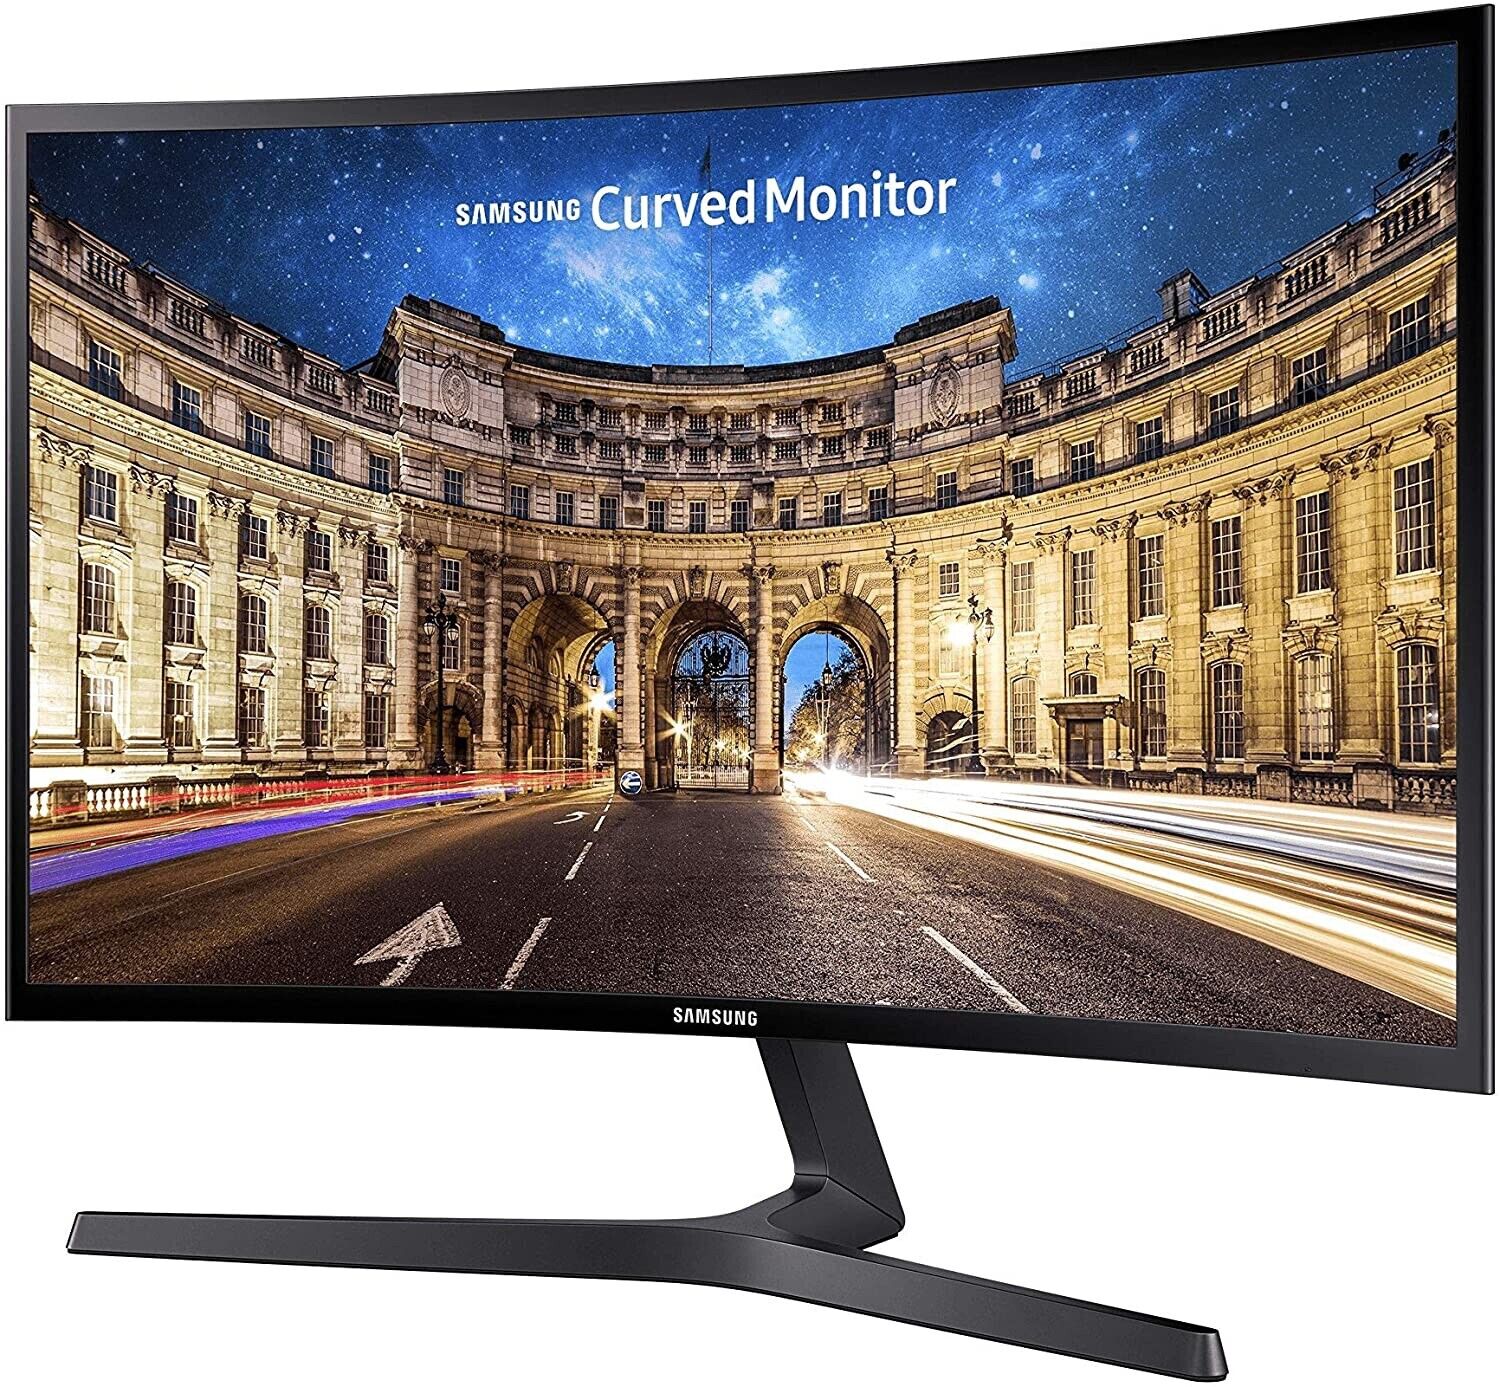 Samsung C27F398 27 inch Curved LED Monitor, Only Been Used Twice.